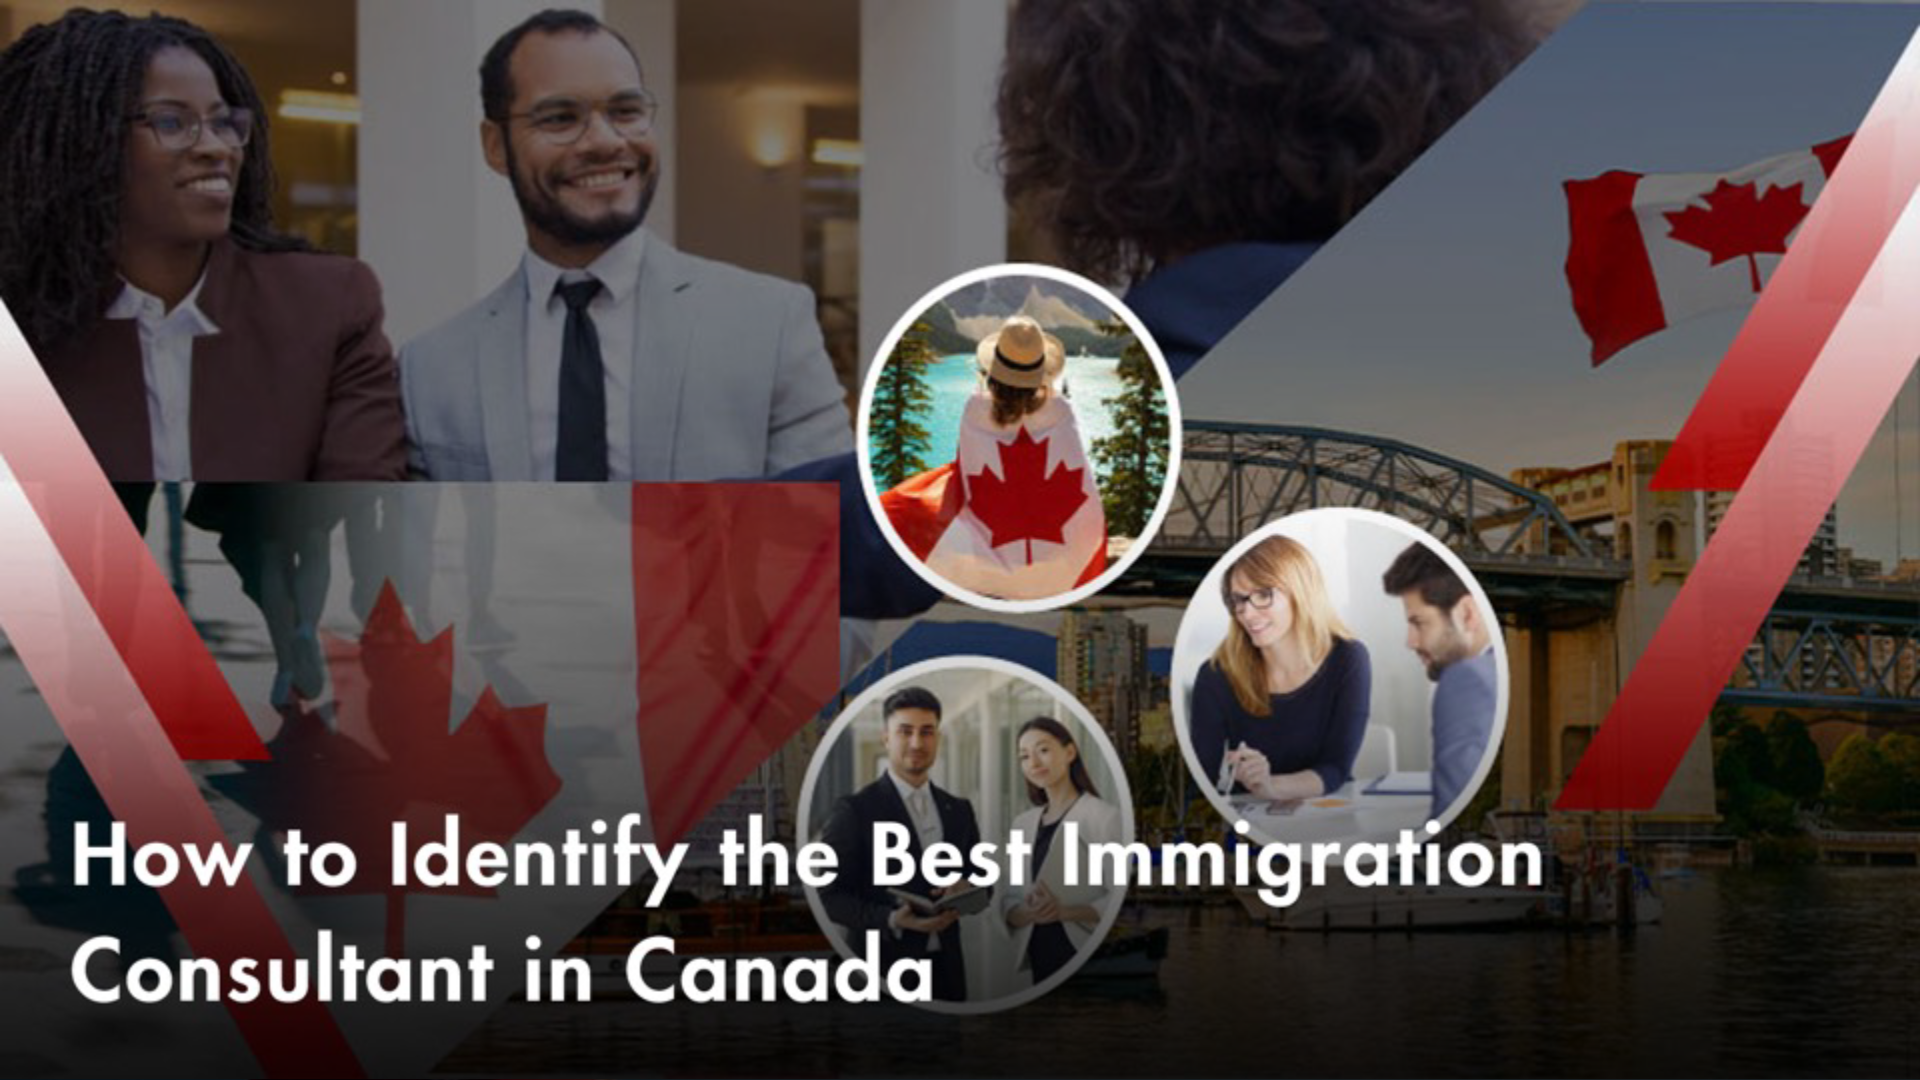 How to Identify the Best Immigration Consultant in Canada